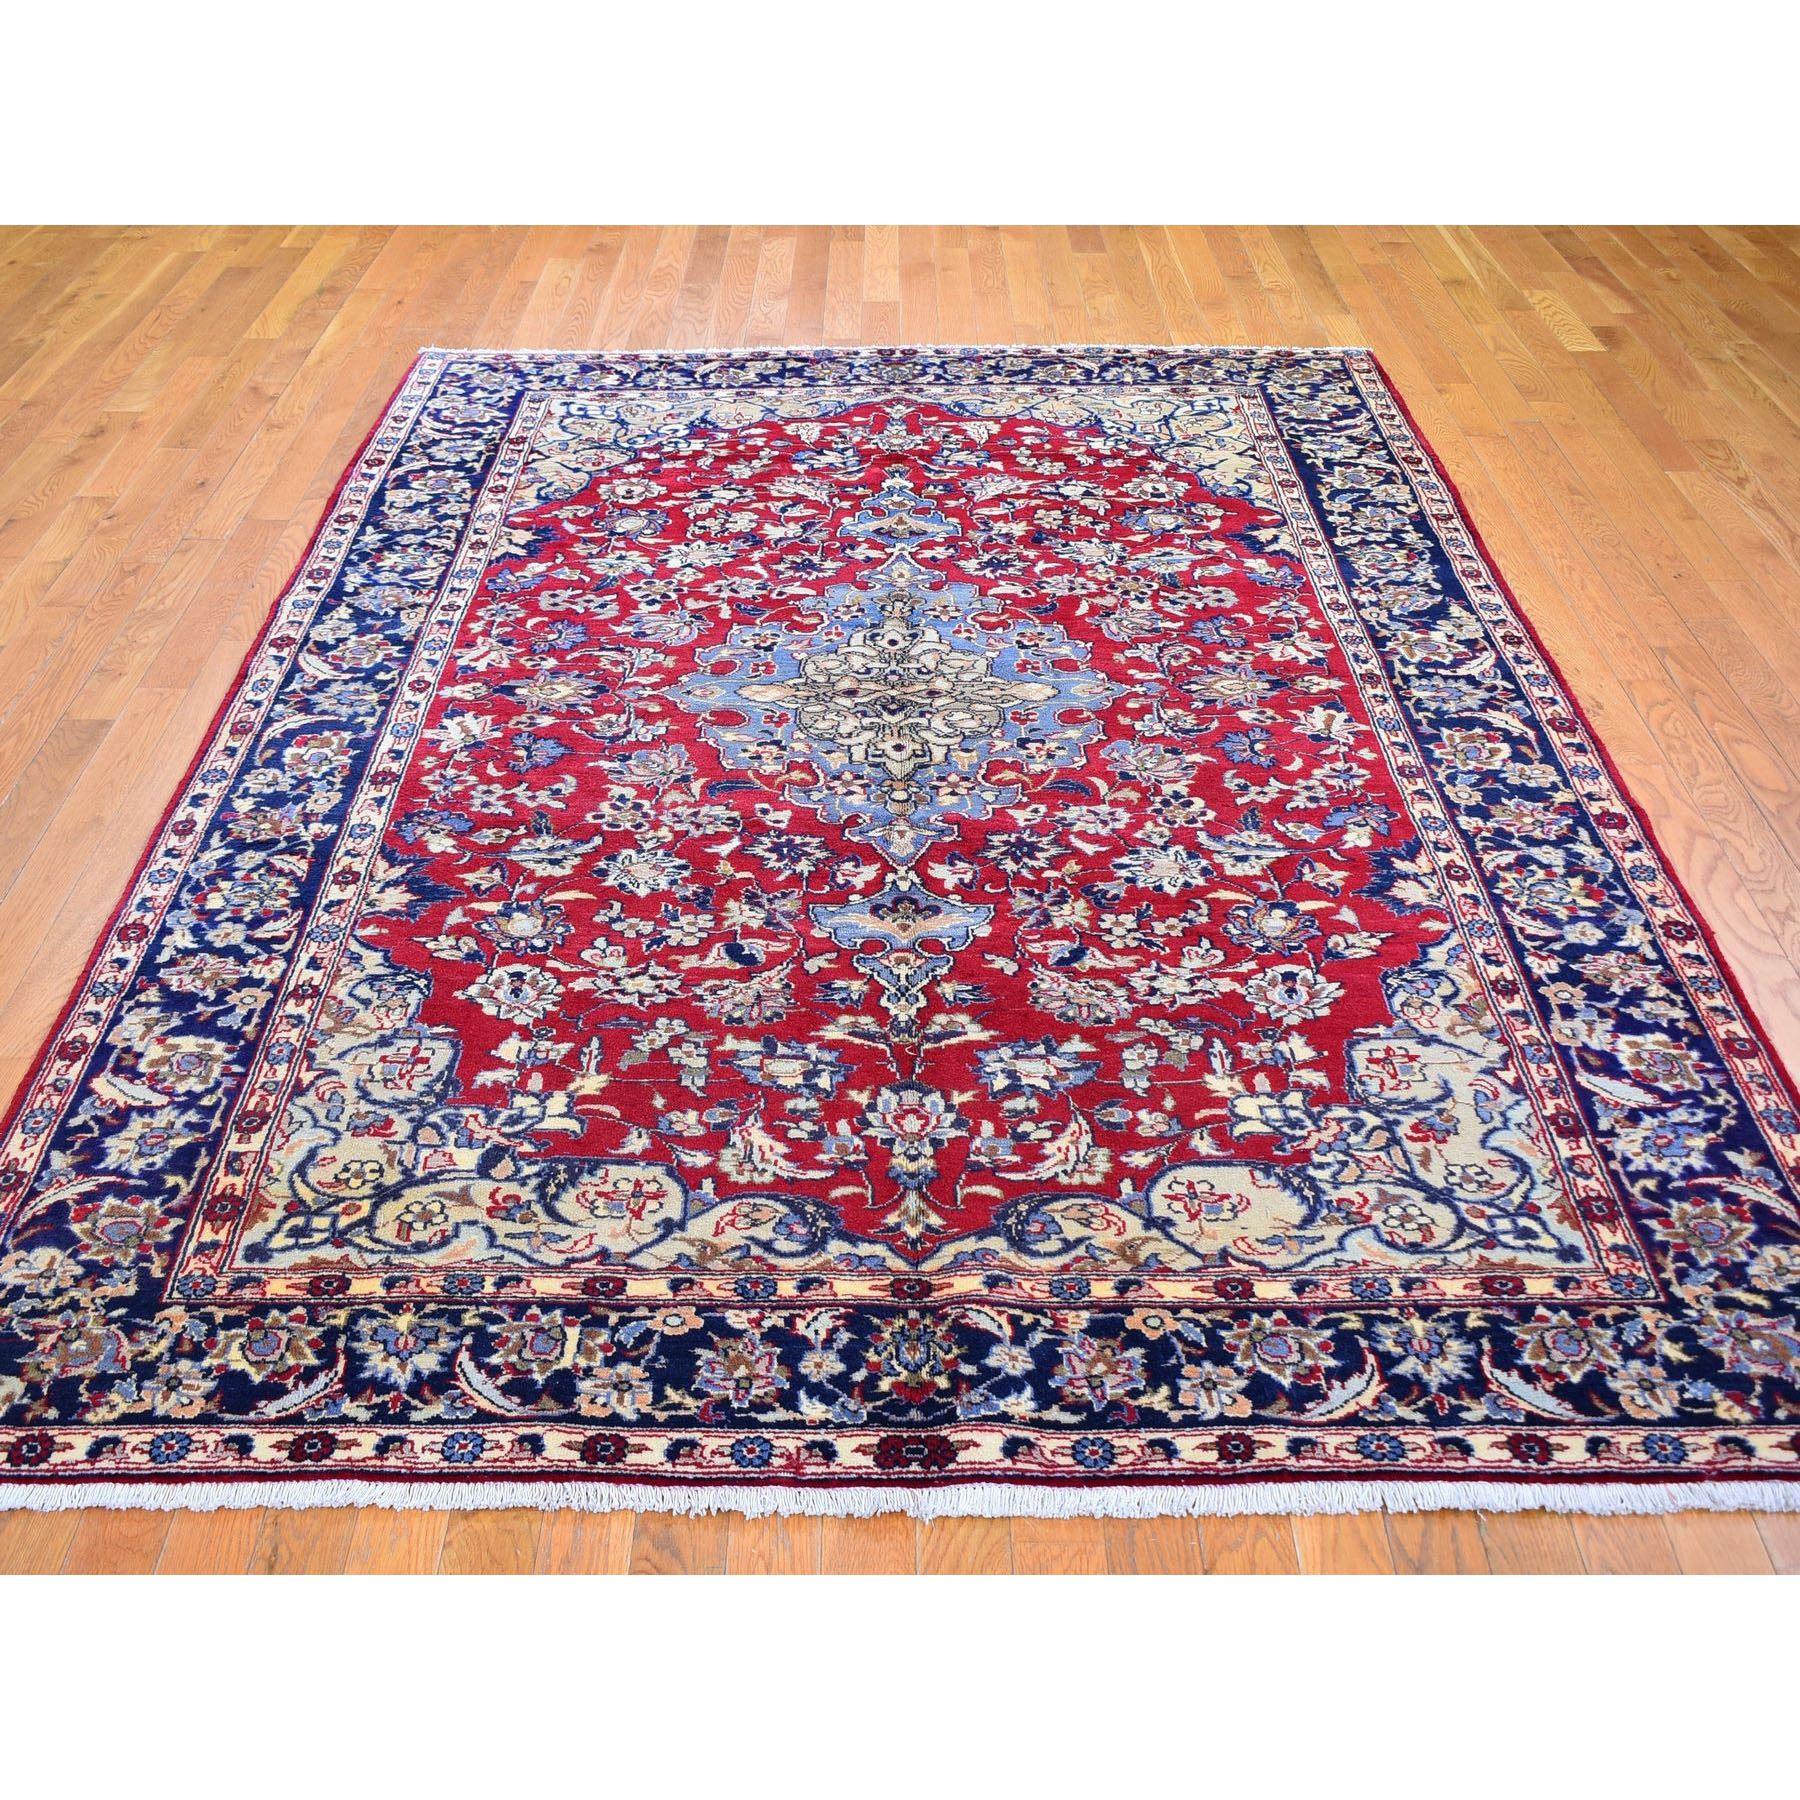 Medieval Red Persian Nahavand Full Pile Soft and Clean Pure Wool Hand Knotted Rug